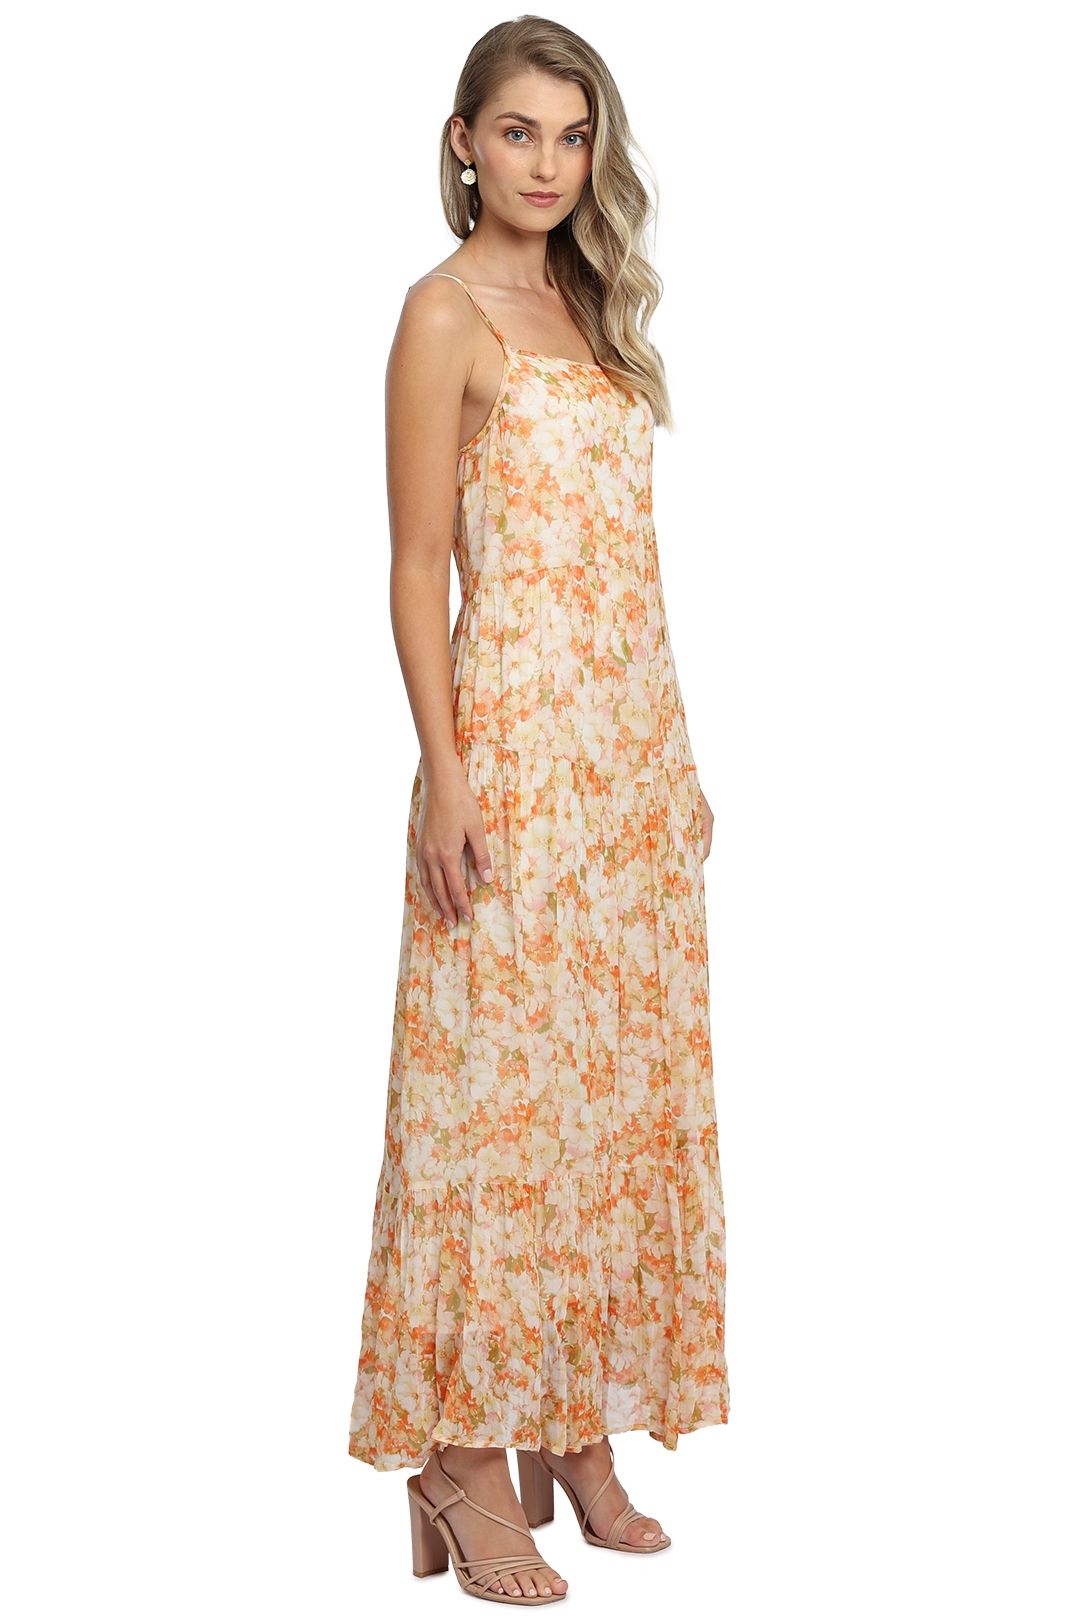 Ministry of Style Spring Meadows Maxi Dress print